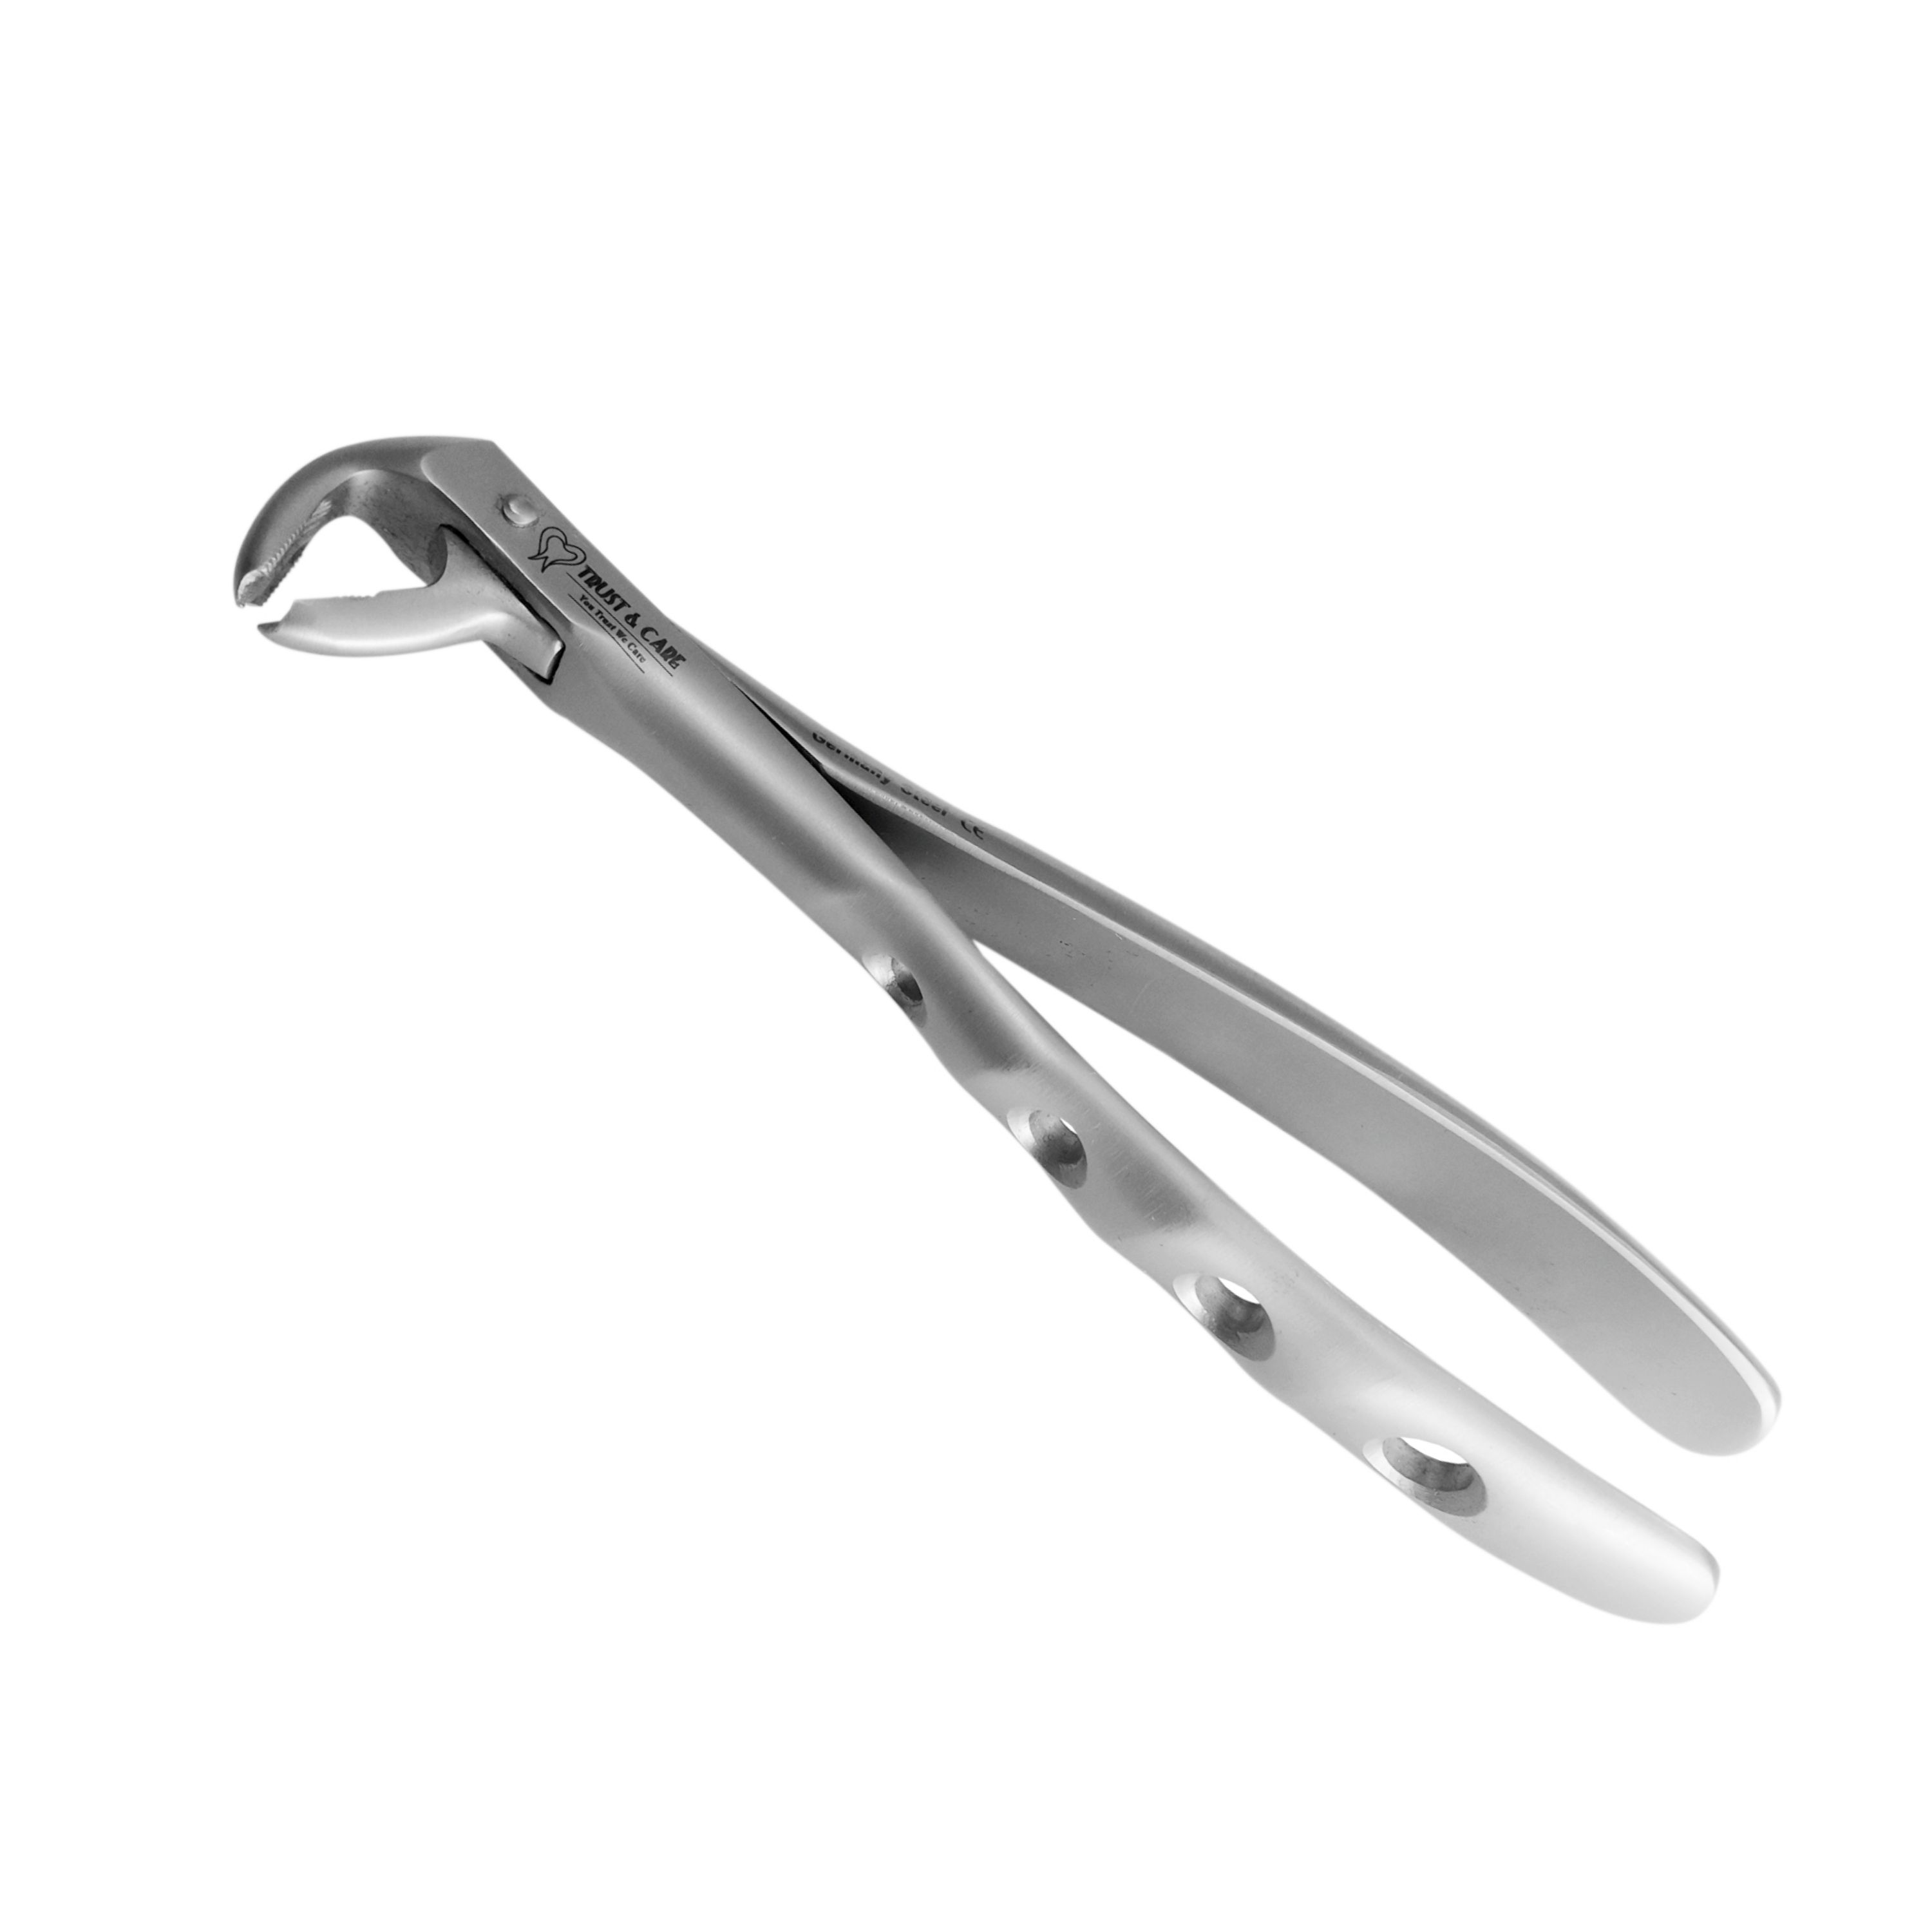 Trust & Care Tooth Extraction Forcep Lower Molars Fig No. 22 Premium